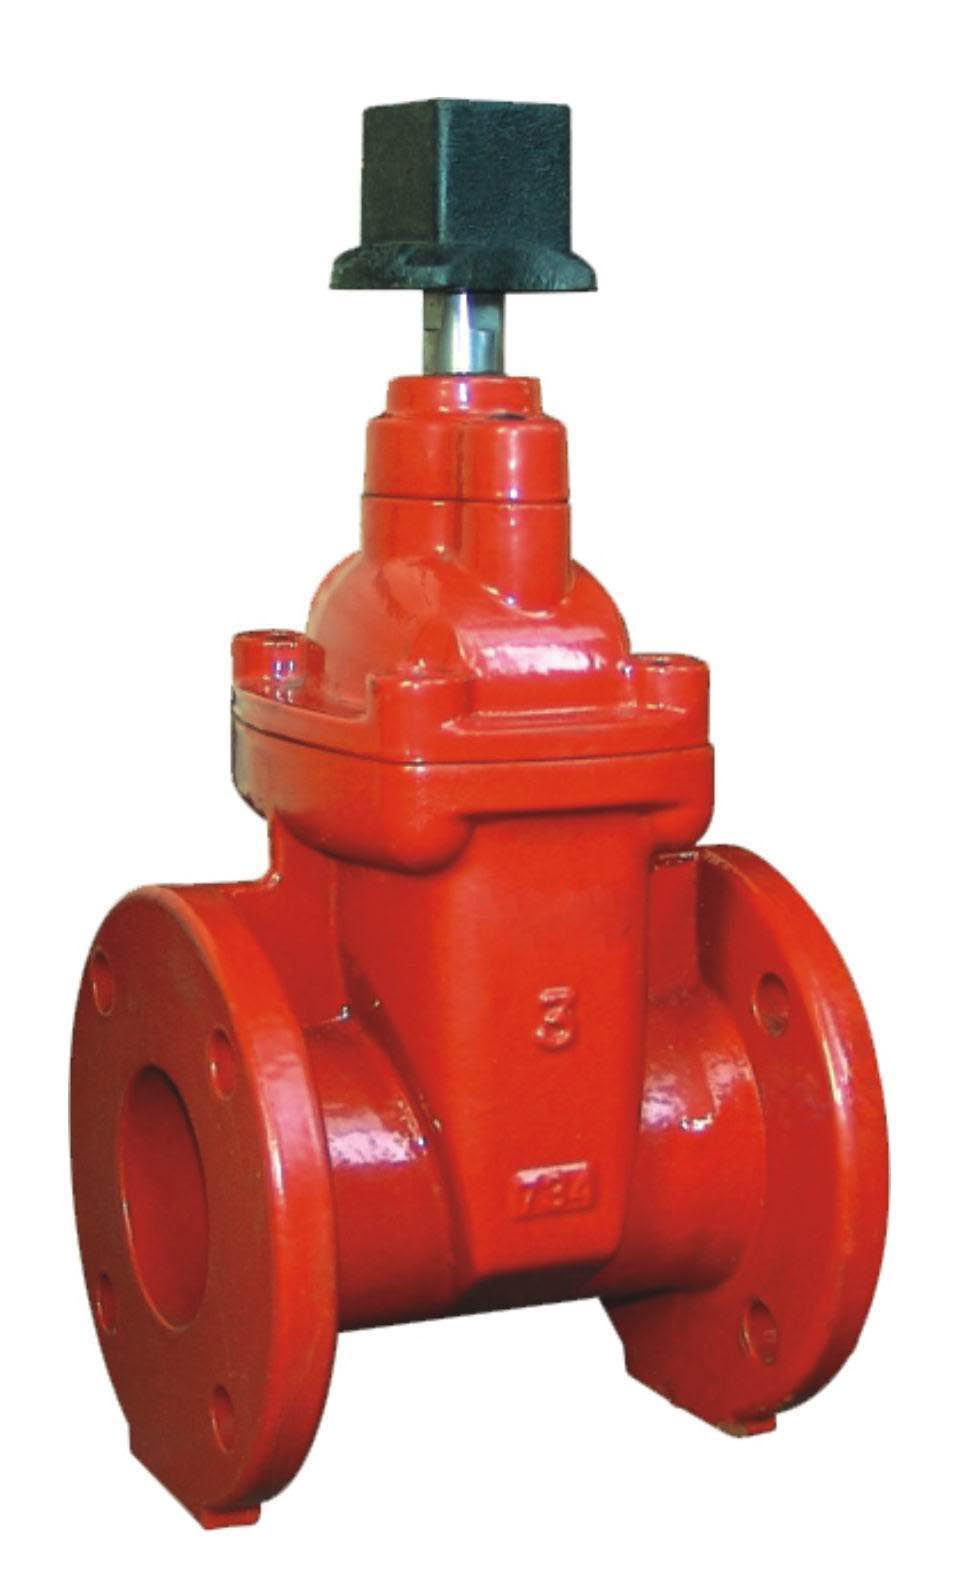 PriceList for Sanitary Butterfly Valve -
 Flanged Ends NRS Resilient Seated Gate Valves-AWWA C509-UL FM Approval – Kingnor